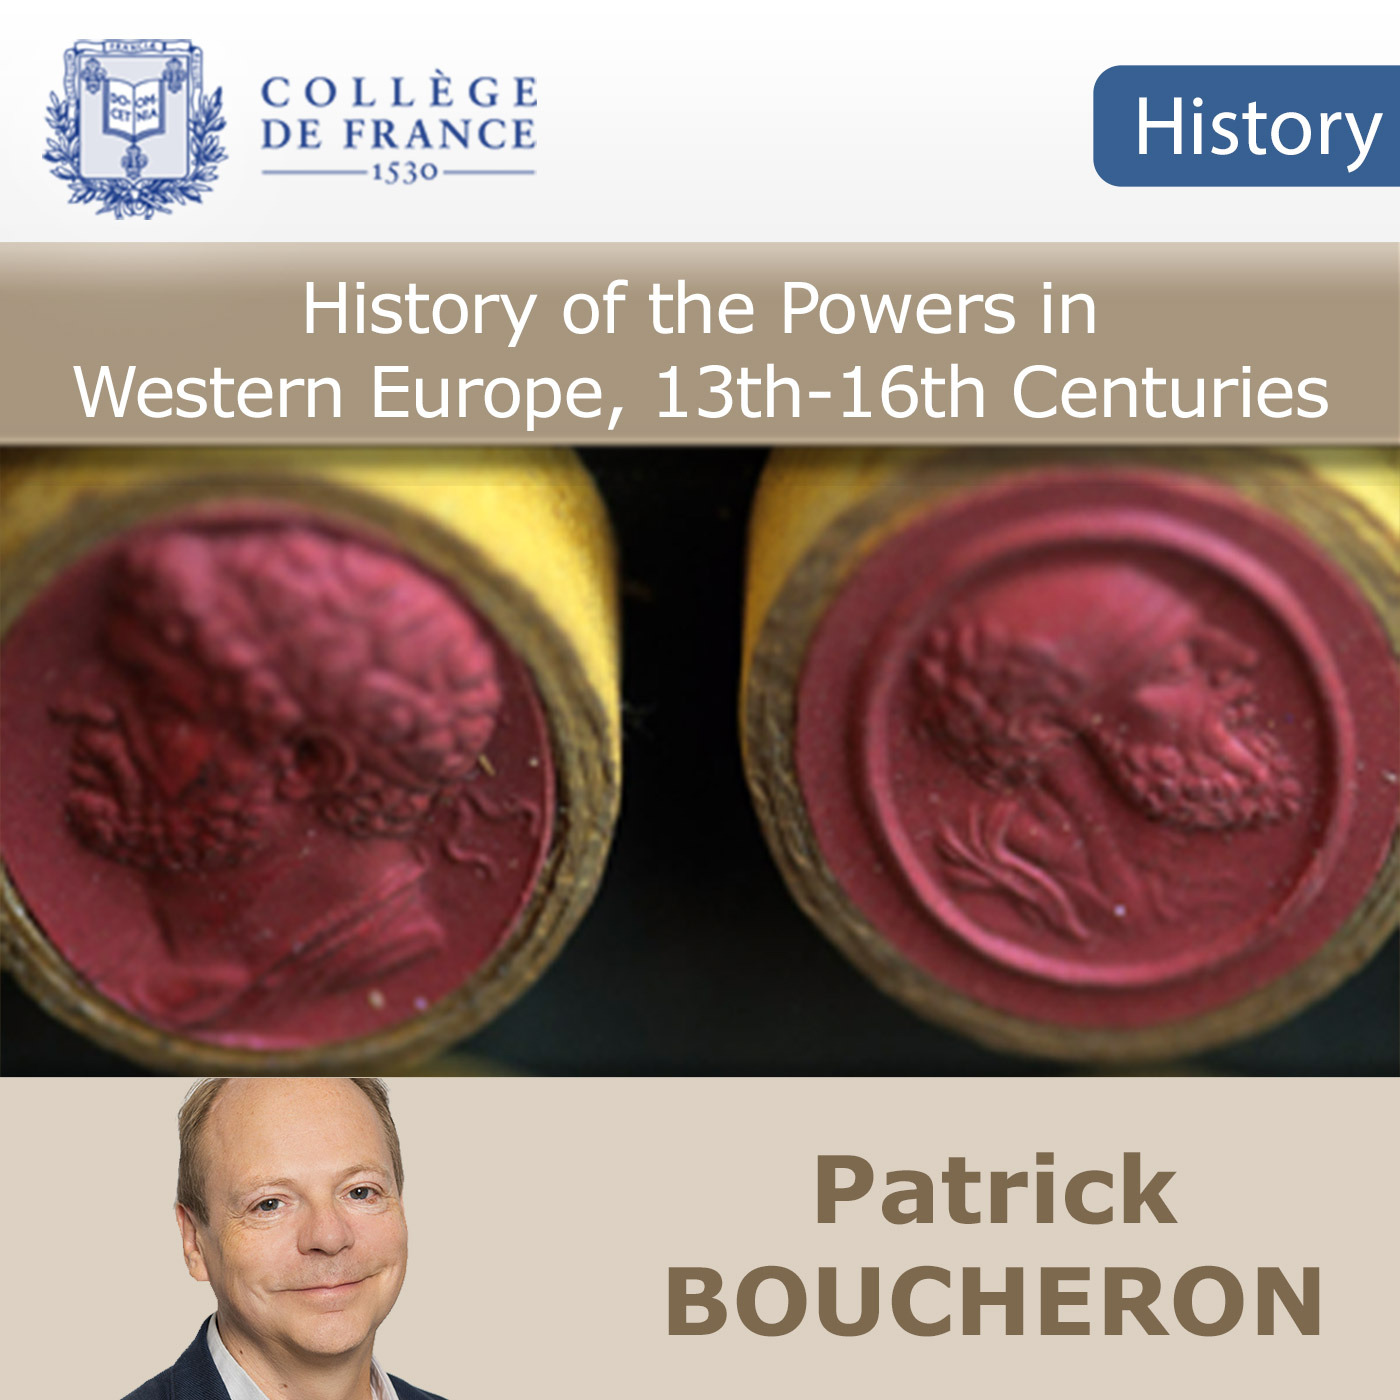 History of the Powers in Western Europe, 13th-16th Centuries:Patrick Boucheron